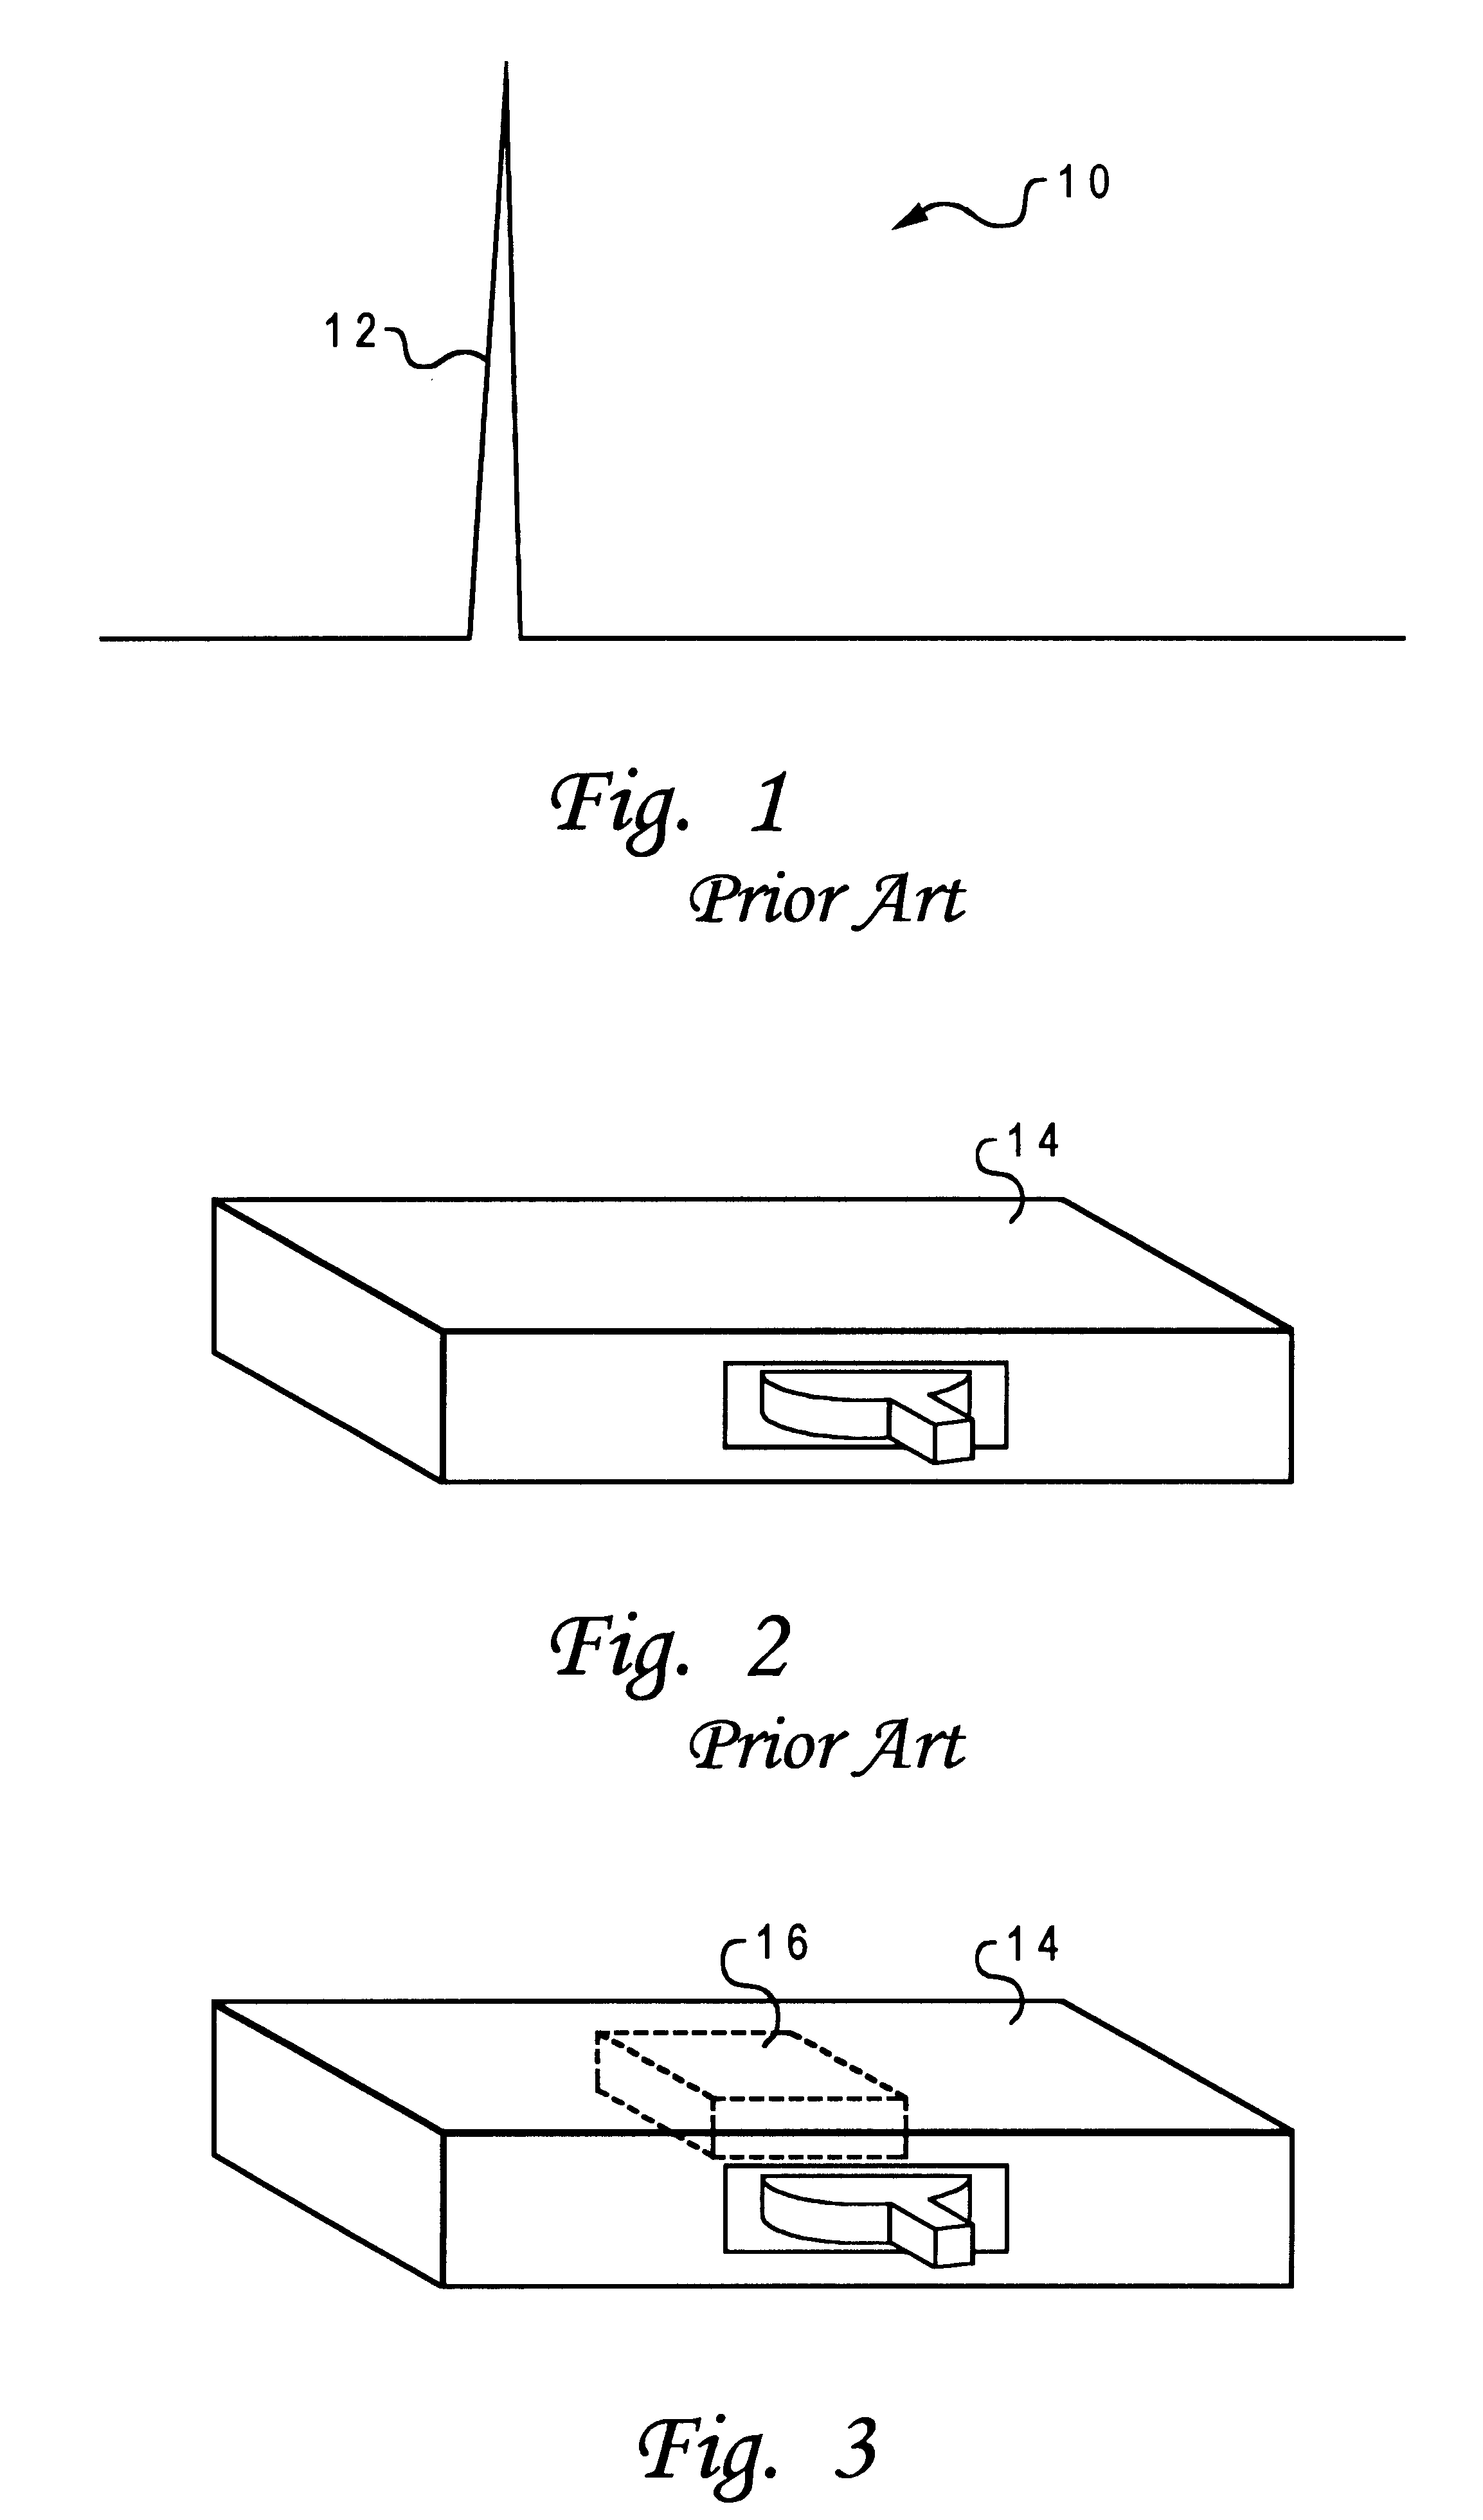 Load balancing and distributing switch-on control for a circuit breaker, an appliance, a device, or an apparatus